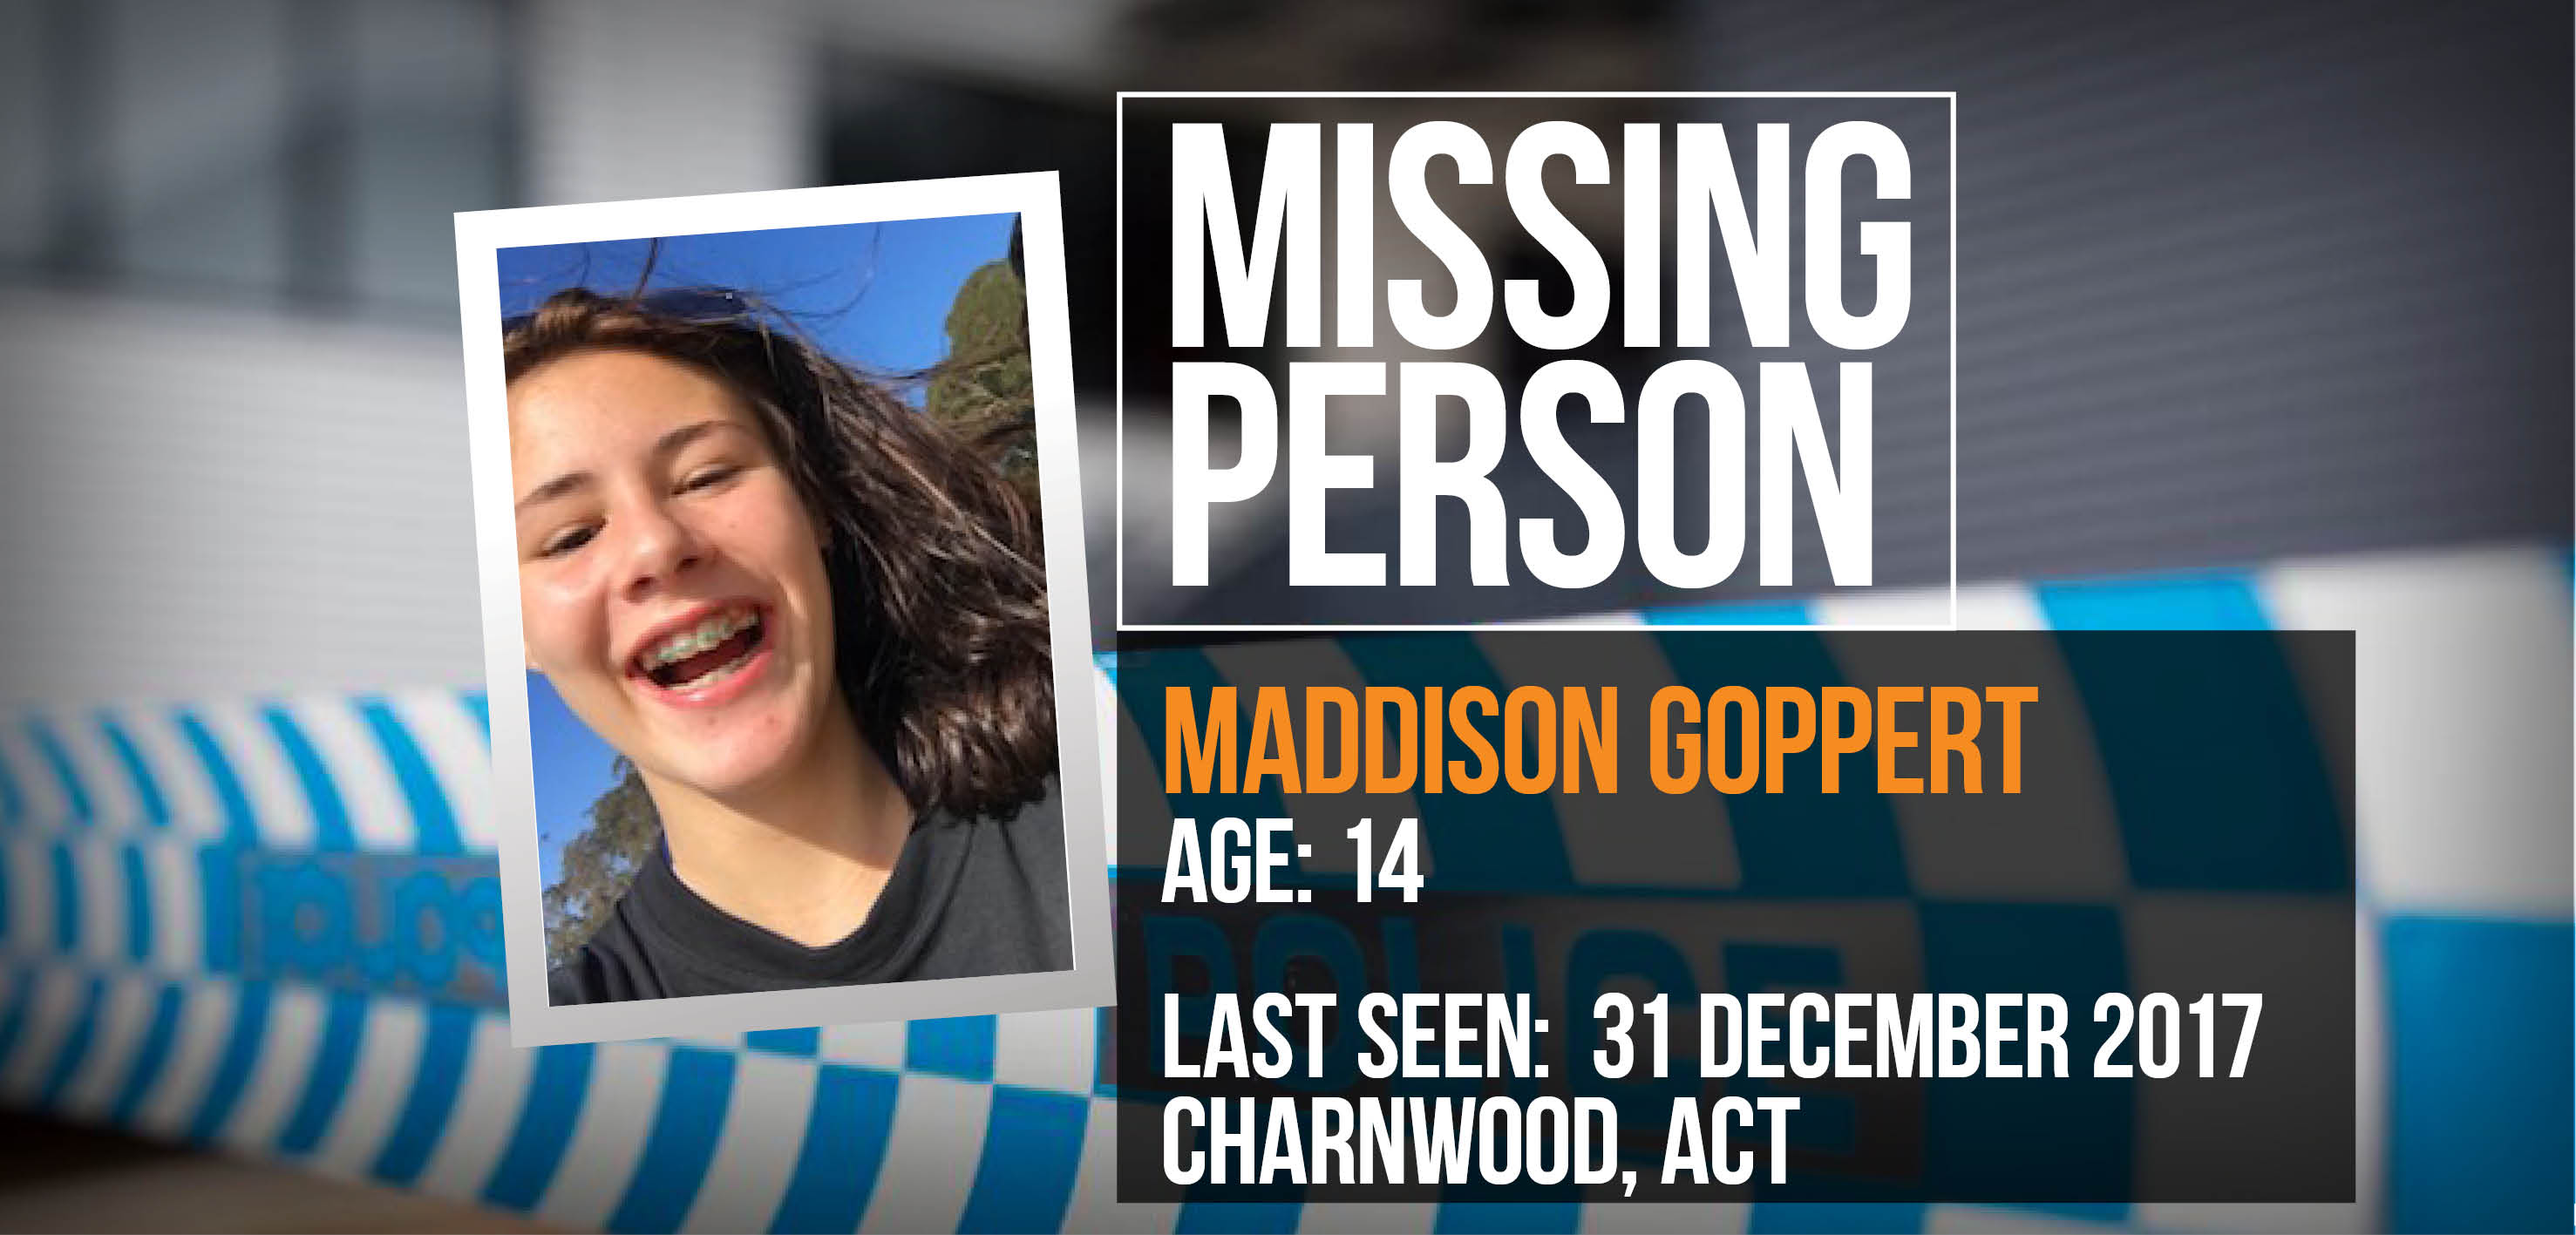 Have you seen Maddison?